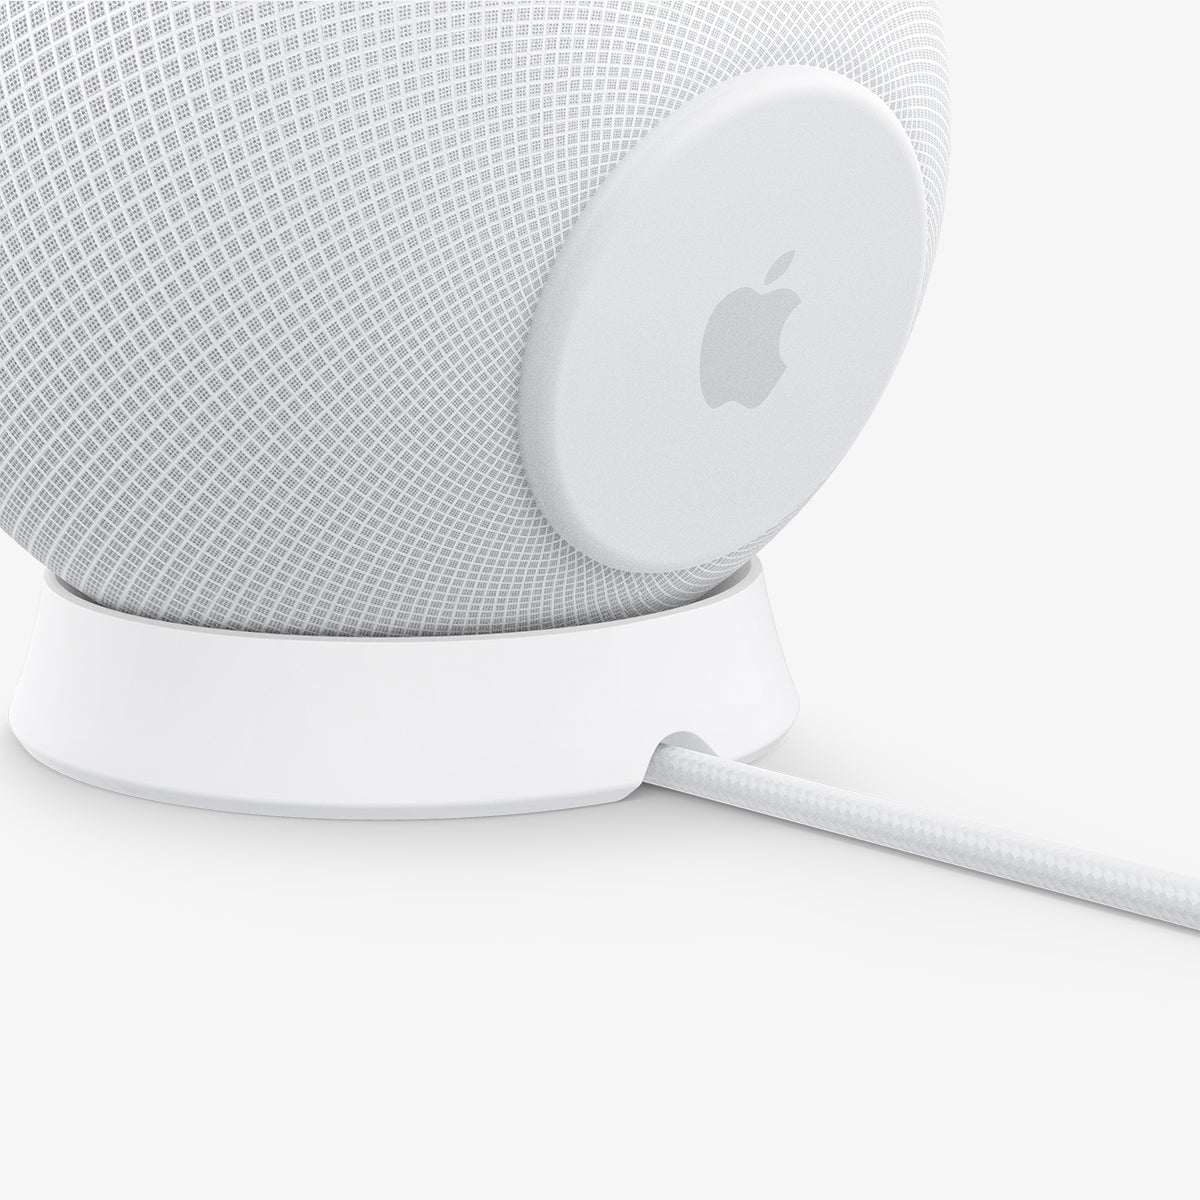 AMP02816 - Apple HomePod Mini Stand Silicone Fit in white showing the back and side with homepod on top